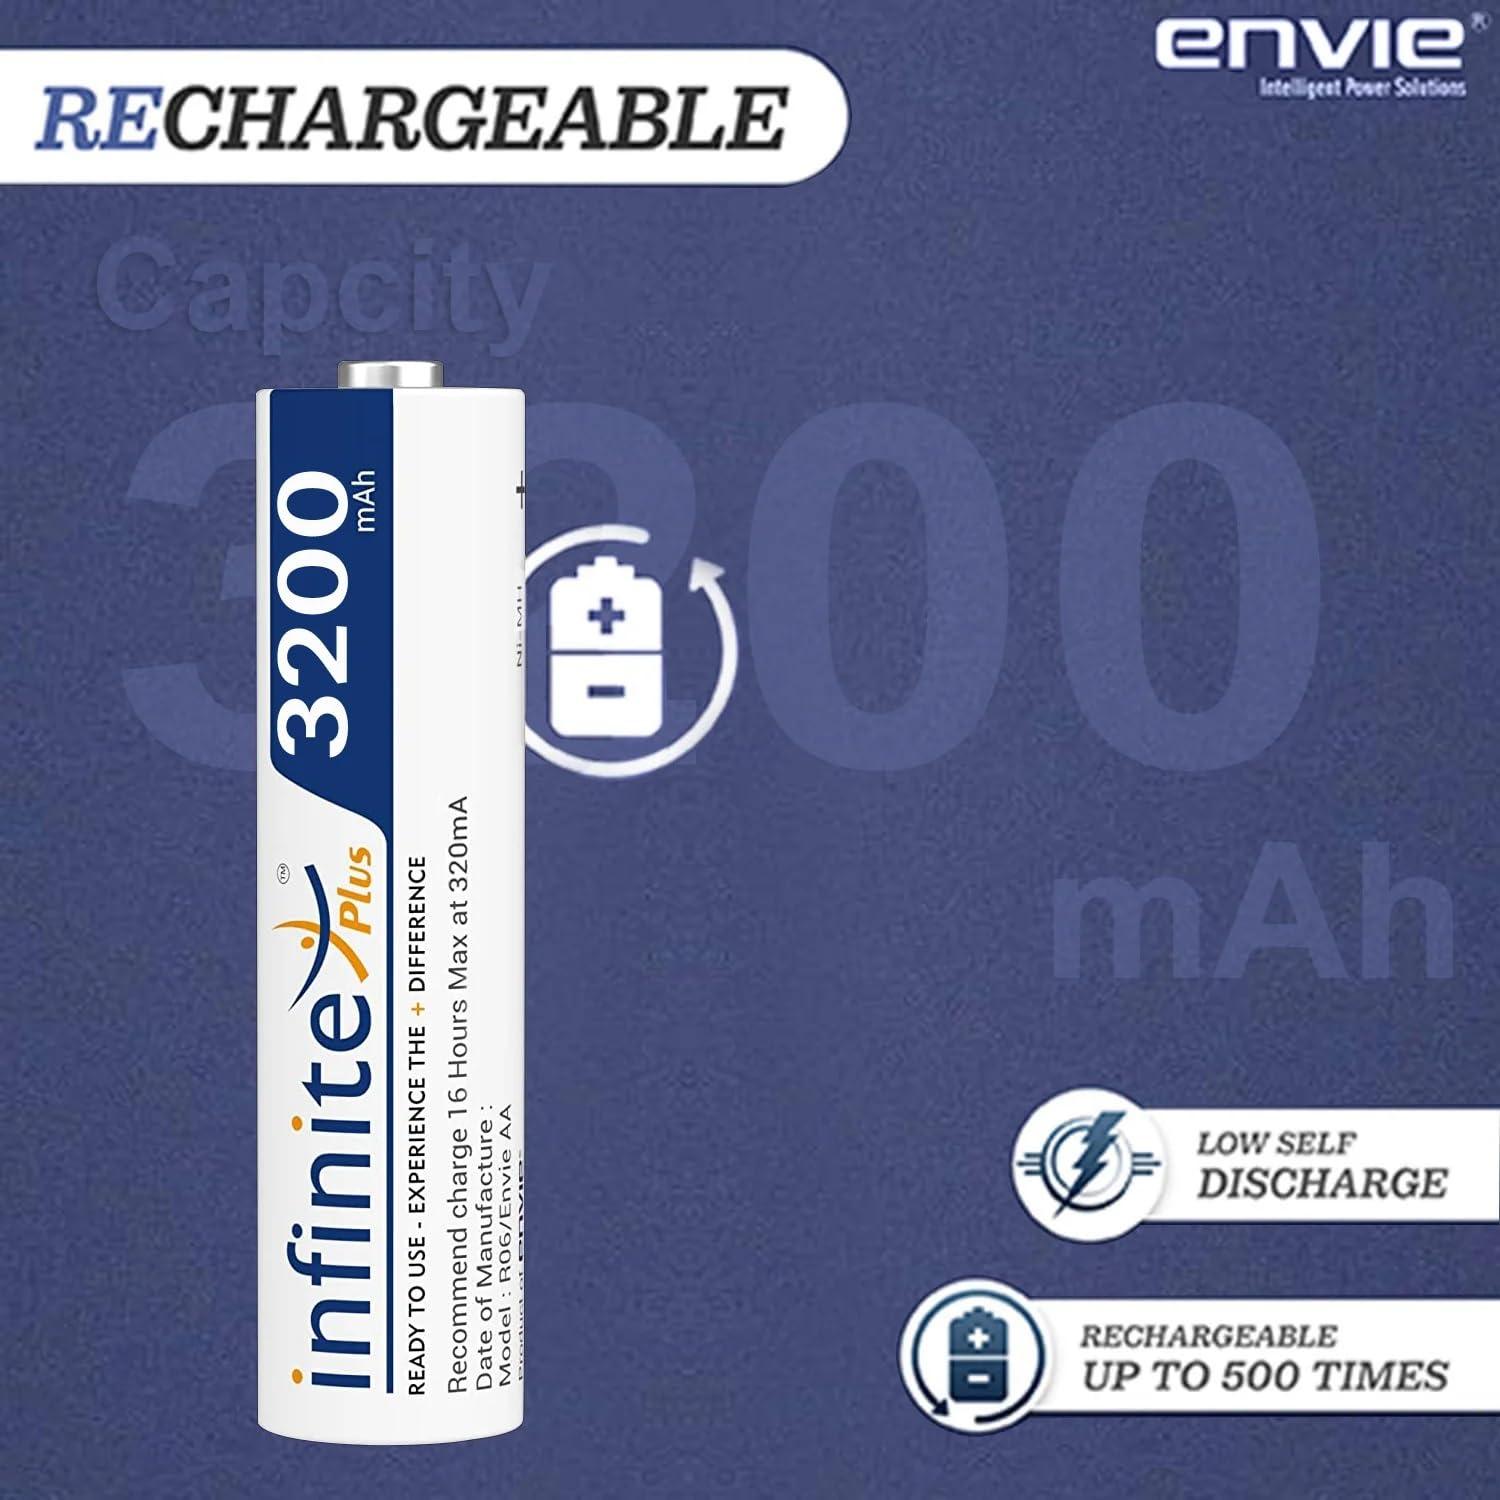 ENVIE (AA3200 2PL) Infinite Rechargeable Battery for Remote Controls, Electronic Toys, Cameras, Flashlights and Others - Digitek